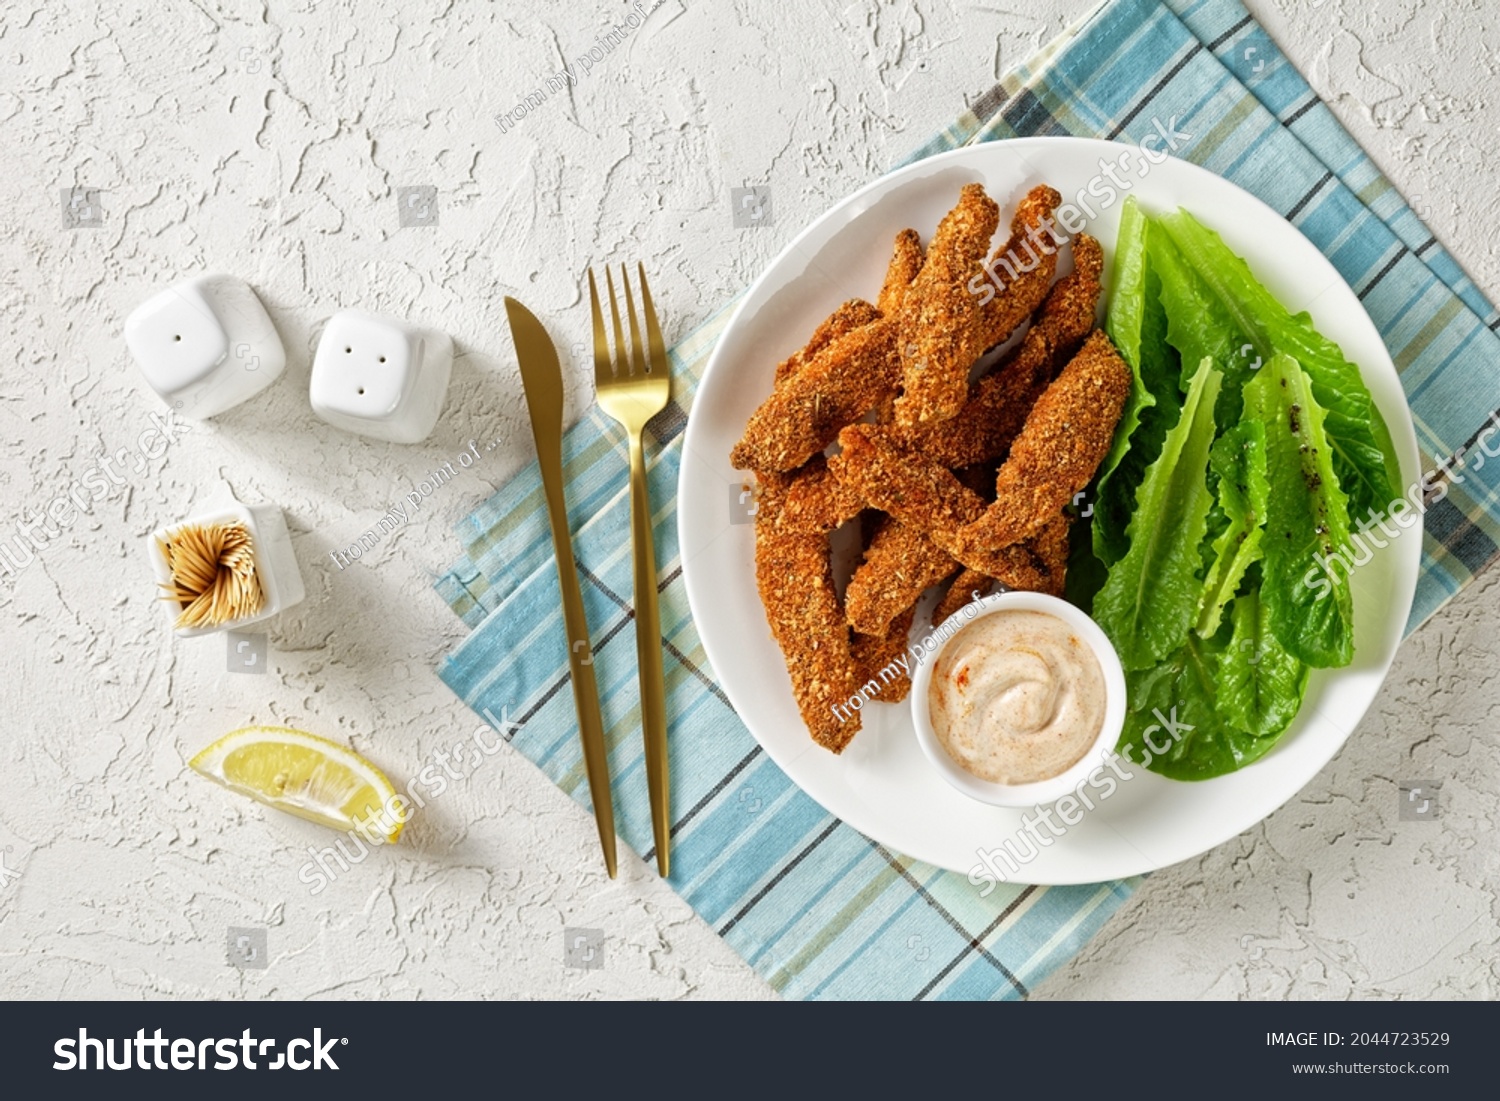 crunchy Baked Chicken Tenders on a white plate with fresh romaine leaves and dipping sauce, horizontal view, american cuisine, flat lay #2044723529